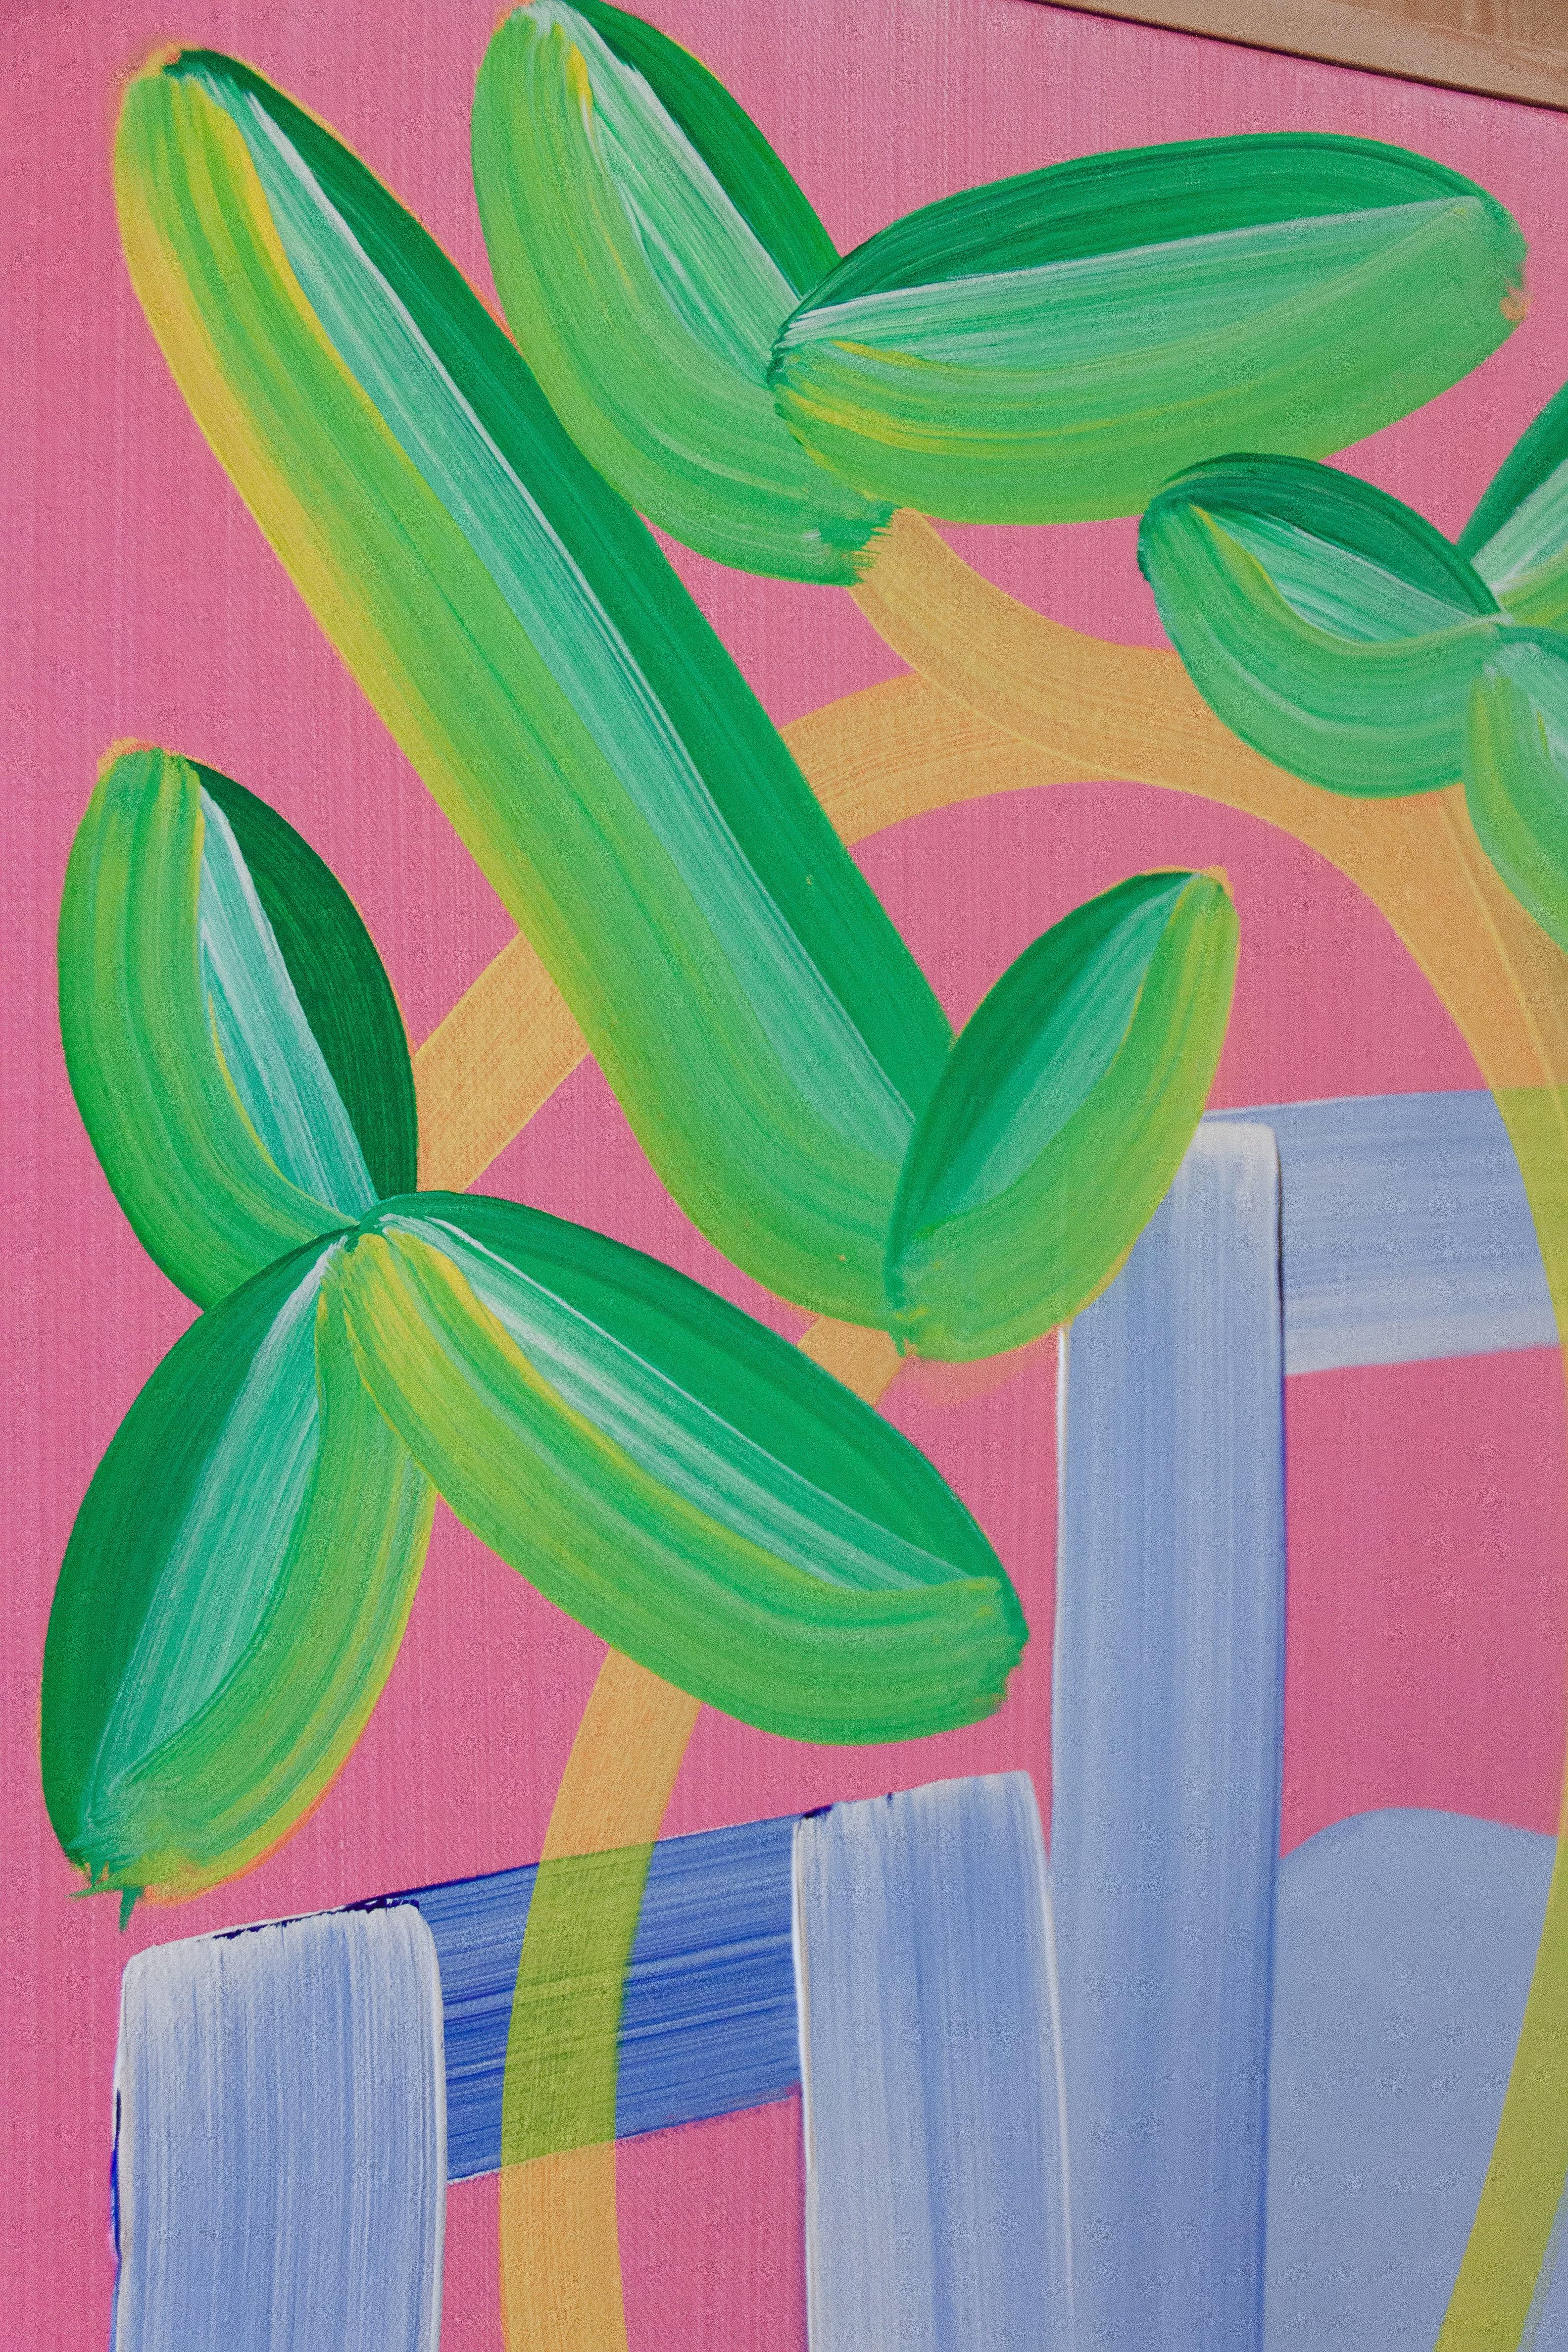 A close-up of a painting of green and yellow flowers on a pink background by Erin D. Garcia for exhibition Group 5.